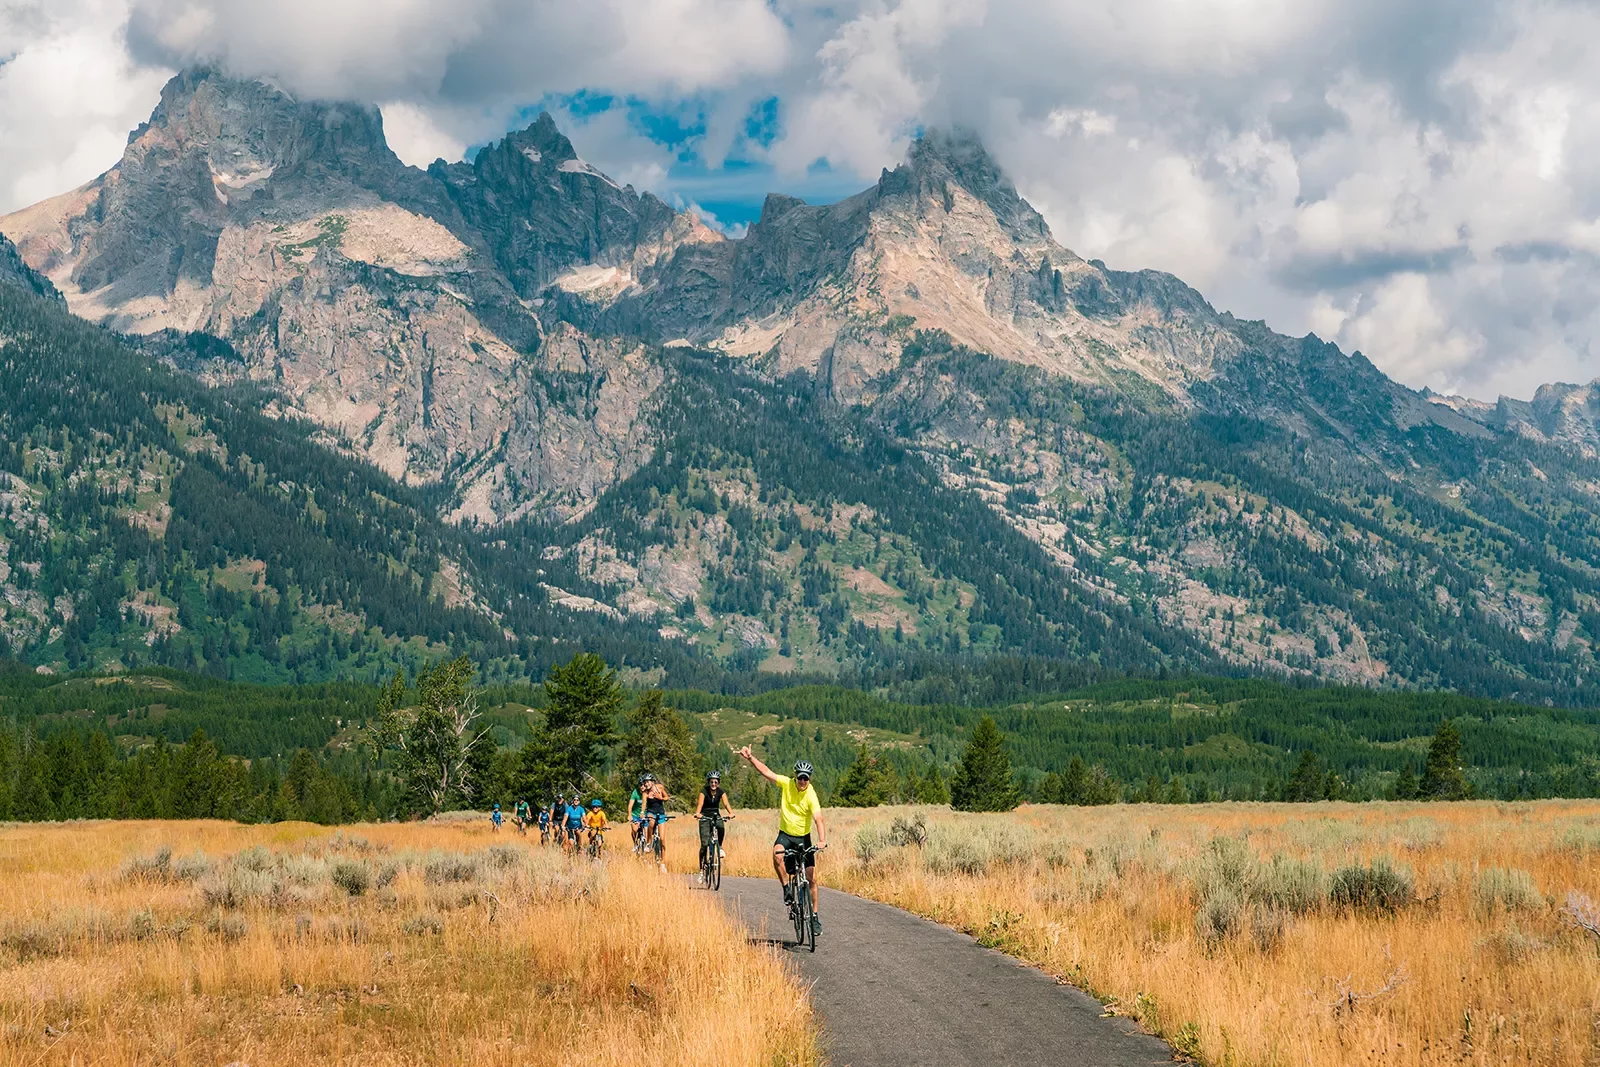 Backroads guests riding through golden fields and rocky mountains